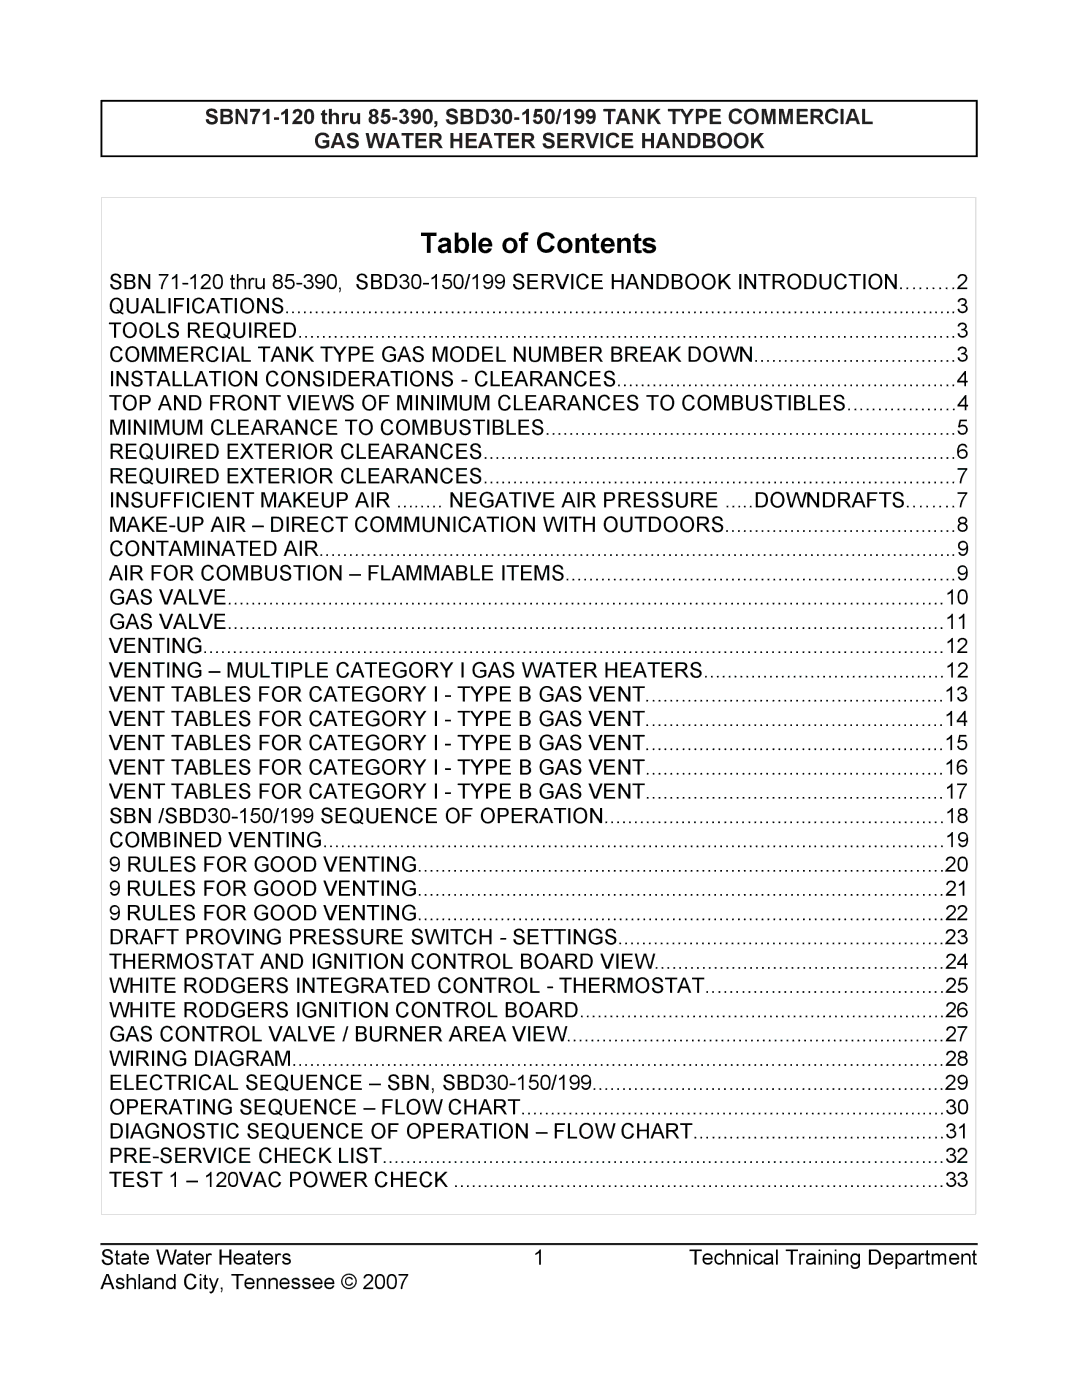 State Industries SBN71 120, SBD30 150, SBN85 390 (A), SBD30 199, SERIES 108 manual Table of Contents 